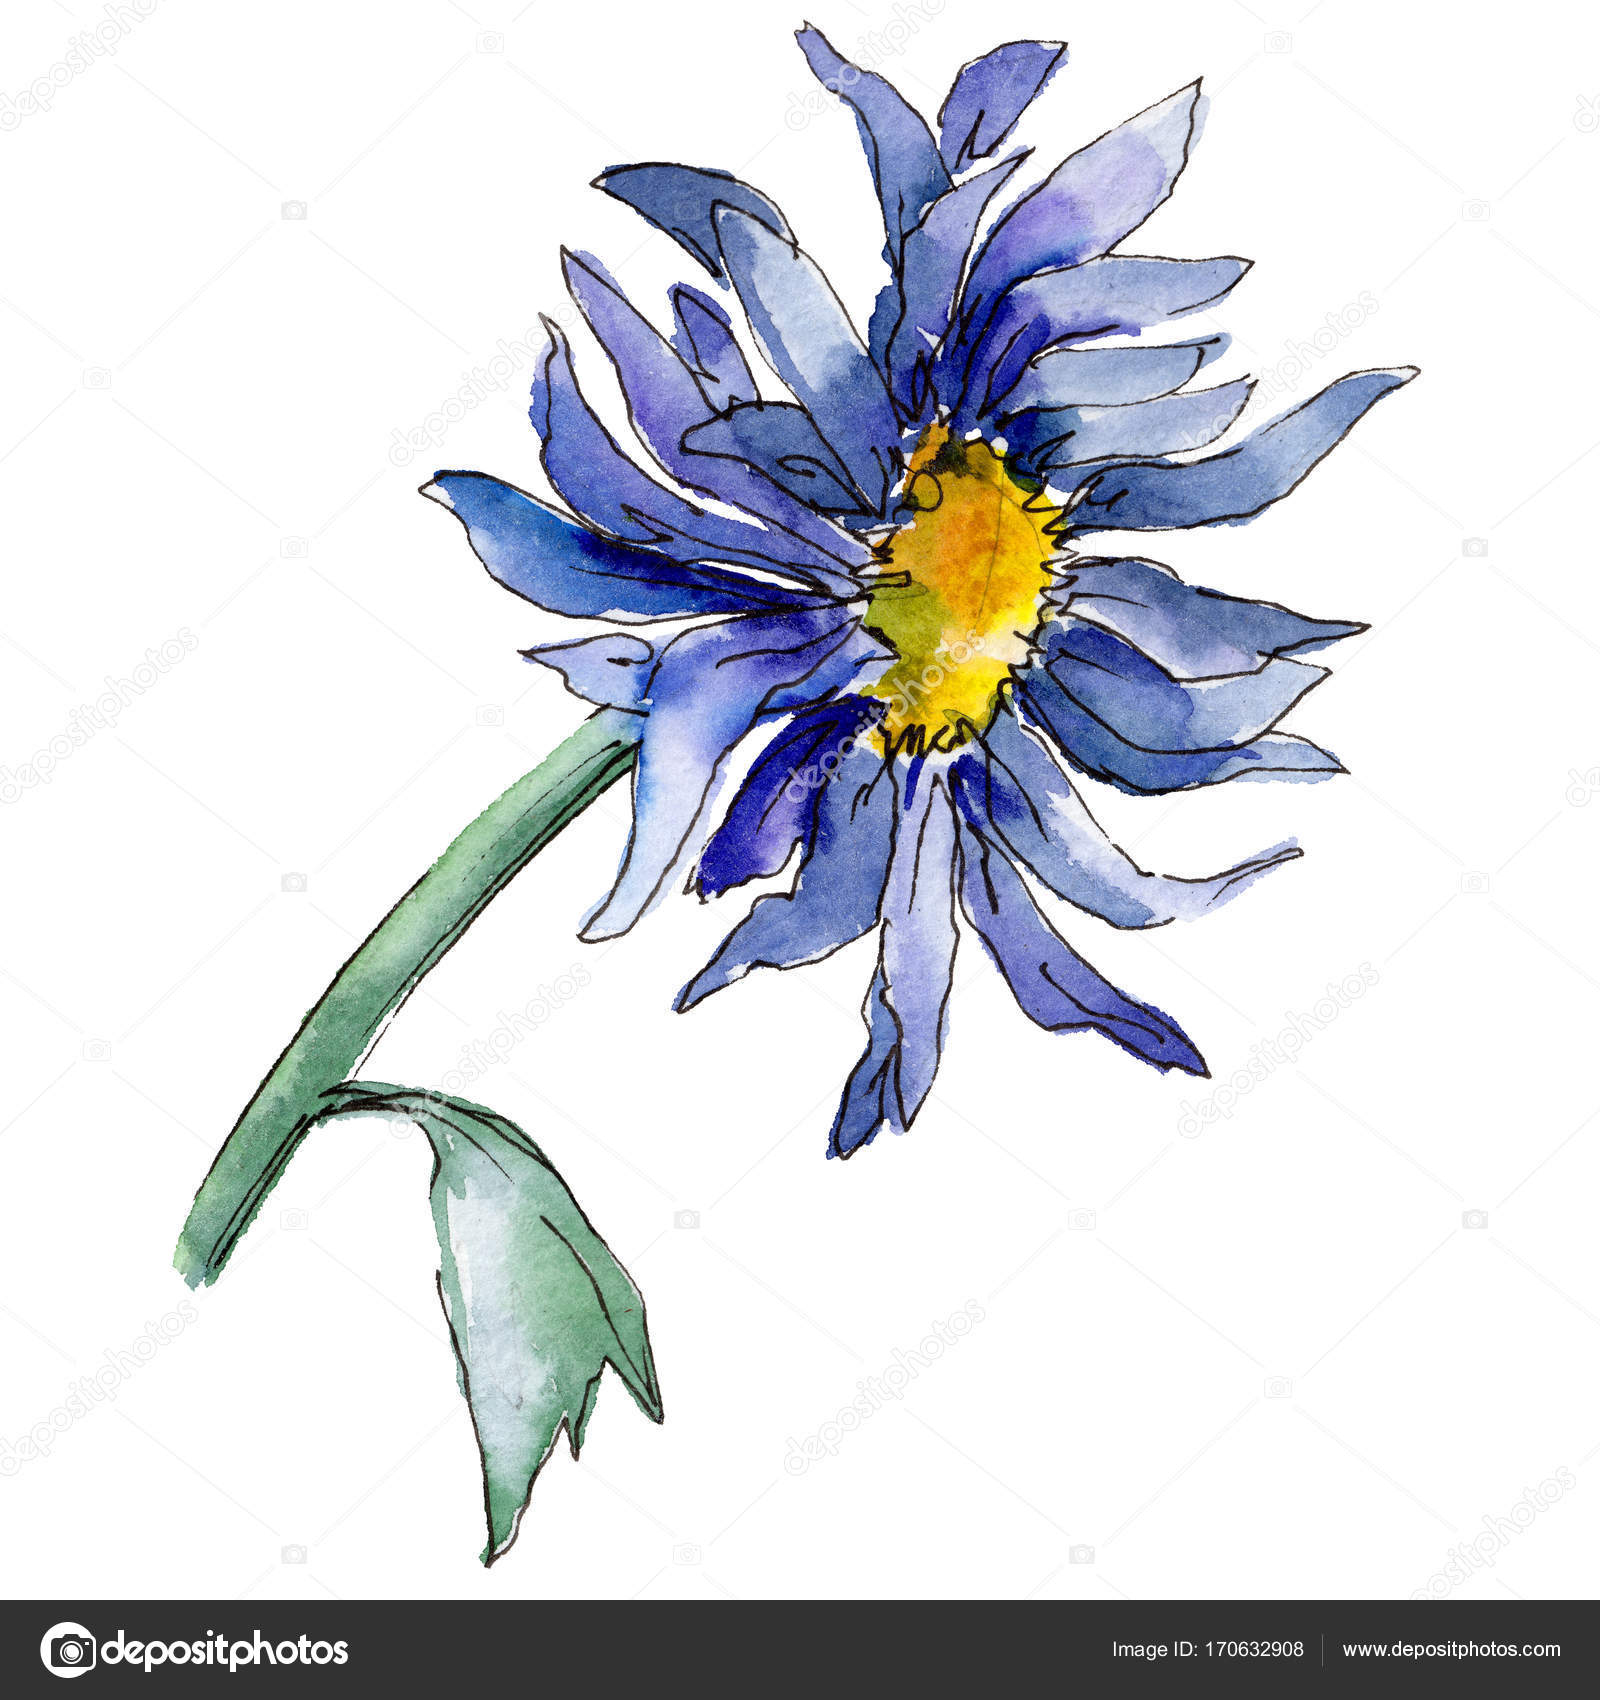 Wildflower Aster Flower In A Watercolor Style Isolated Stock Photo C Mystocks 170632908,Chicken Breast Calories